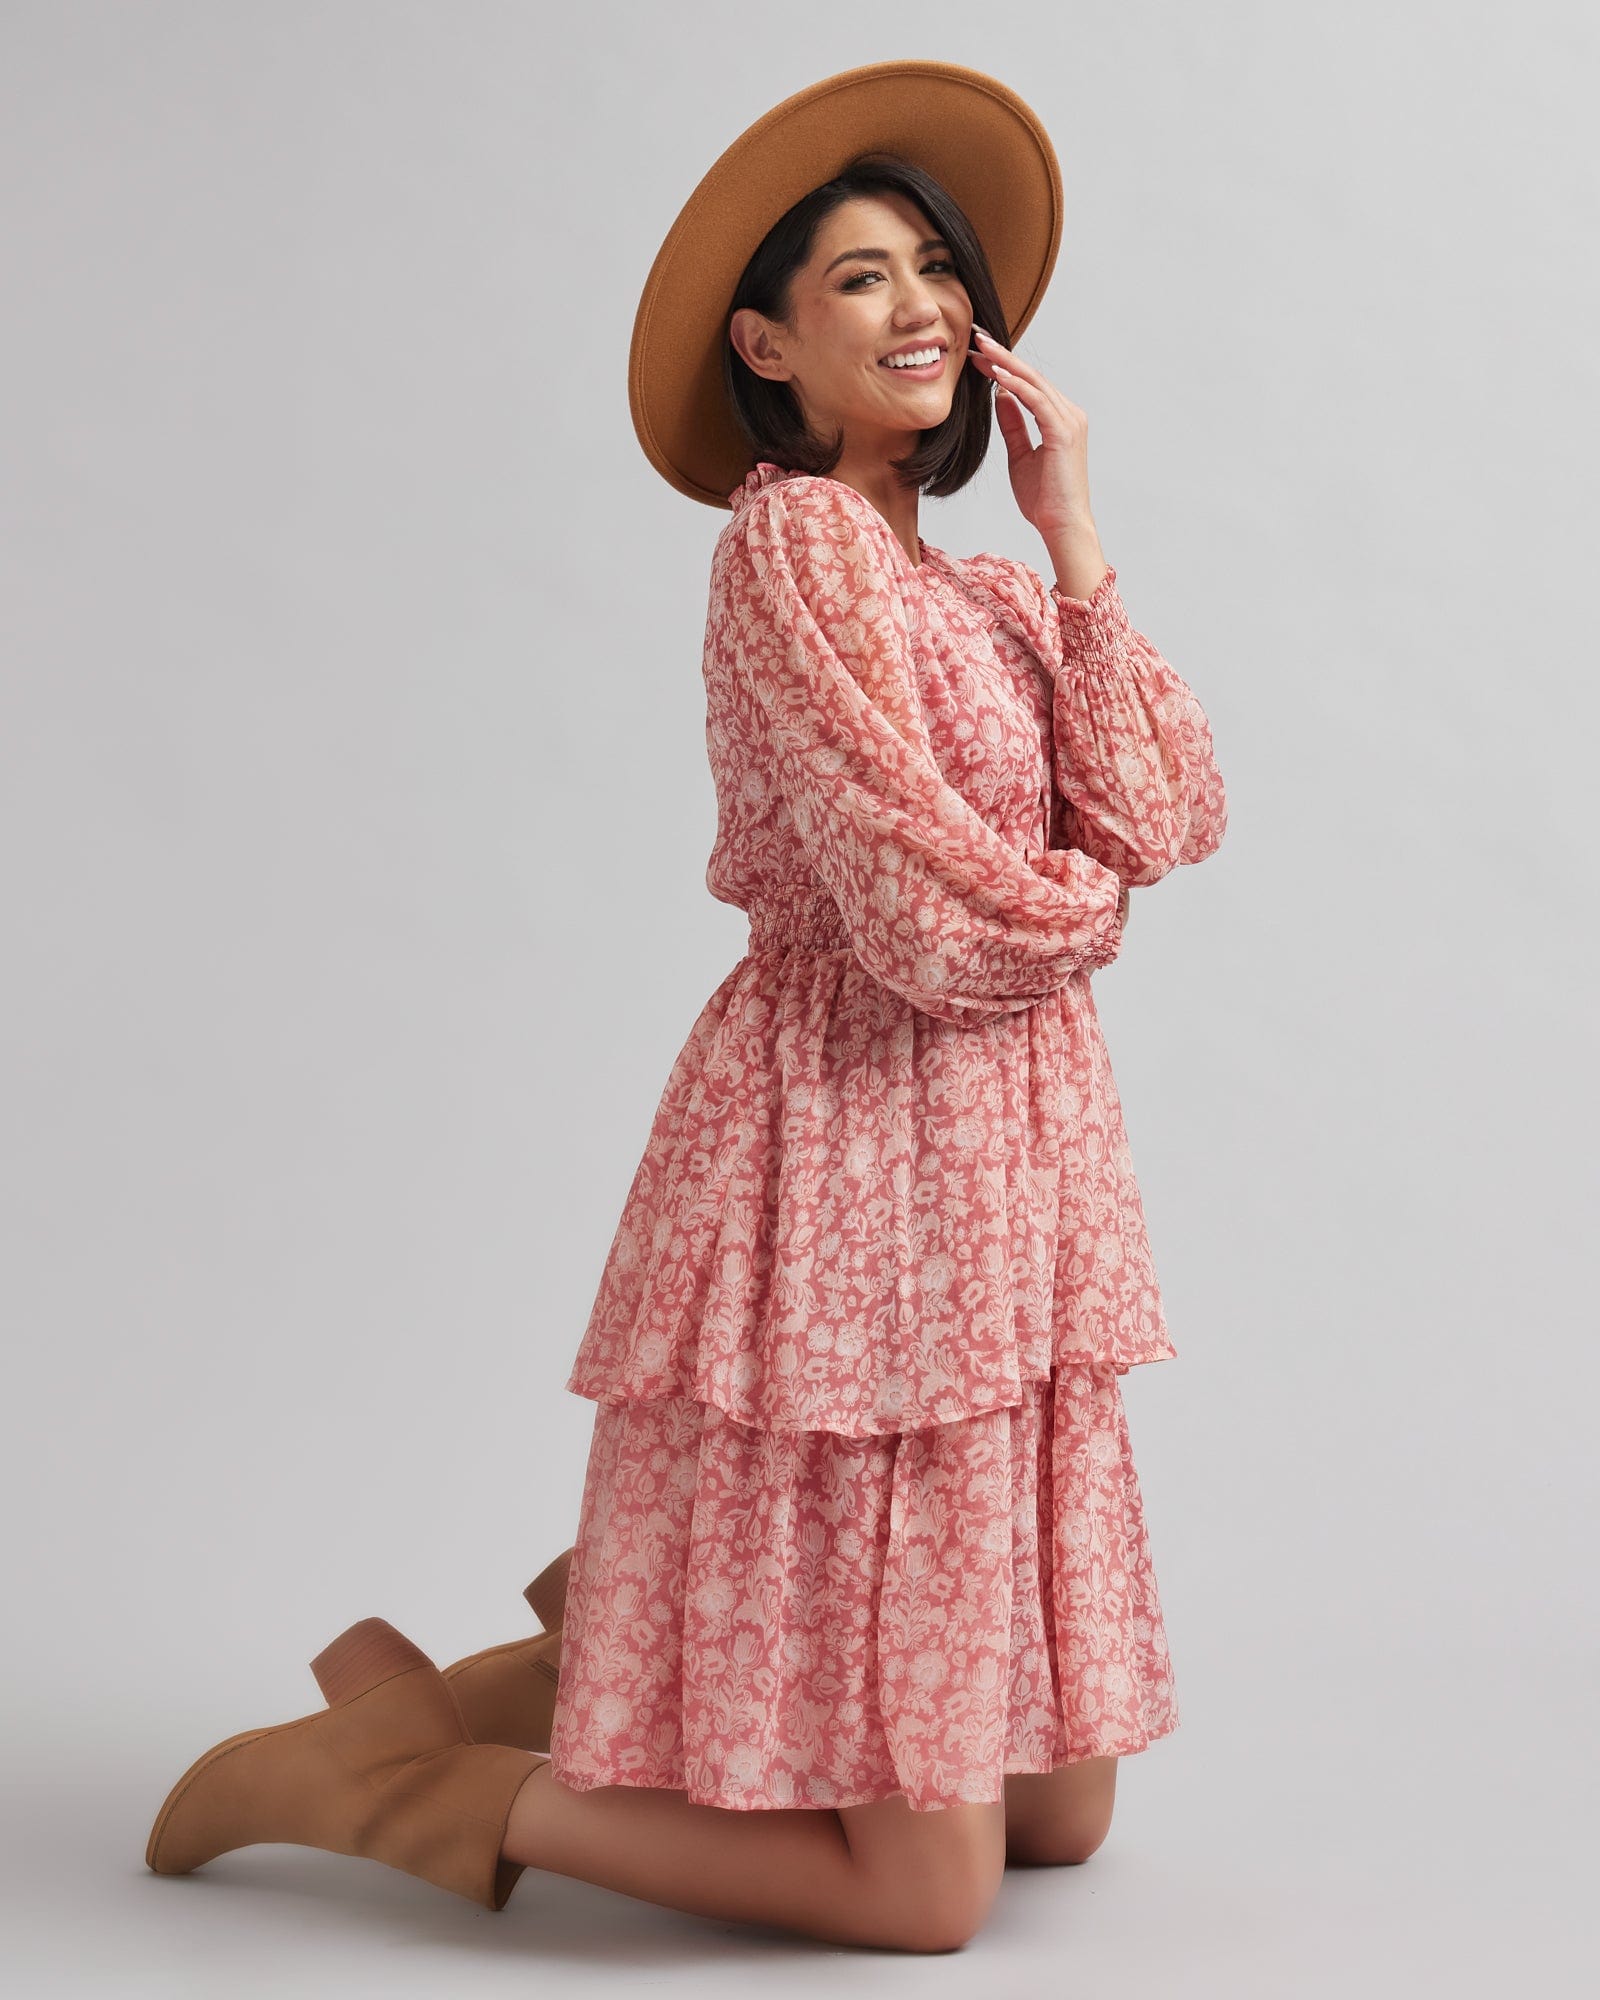 Woman in a long sleeve, knee-length, pink floral printed dress